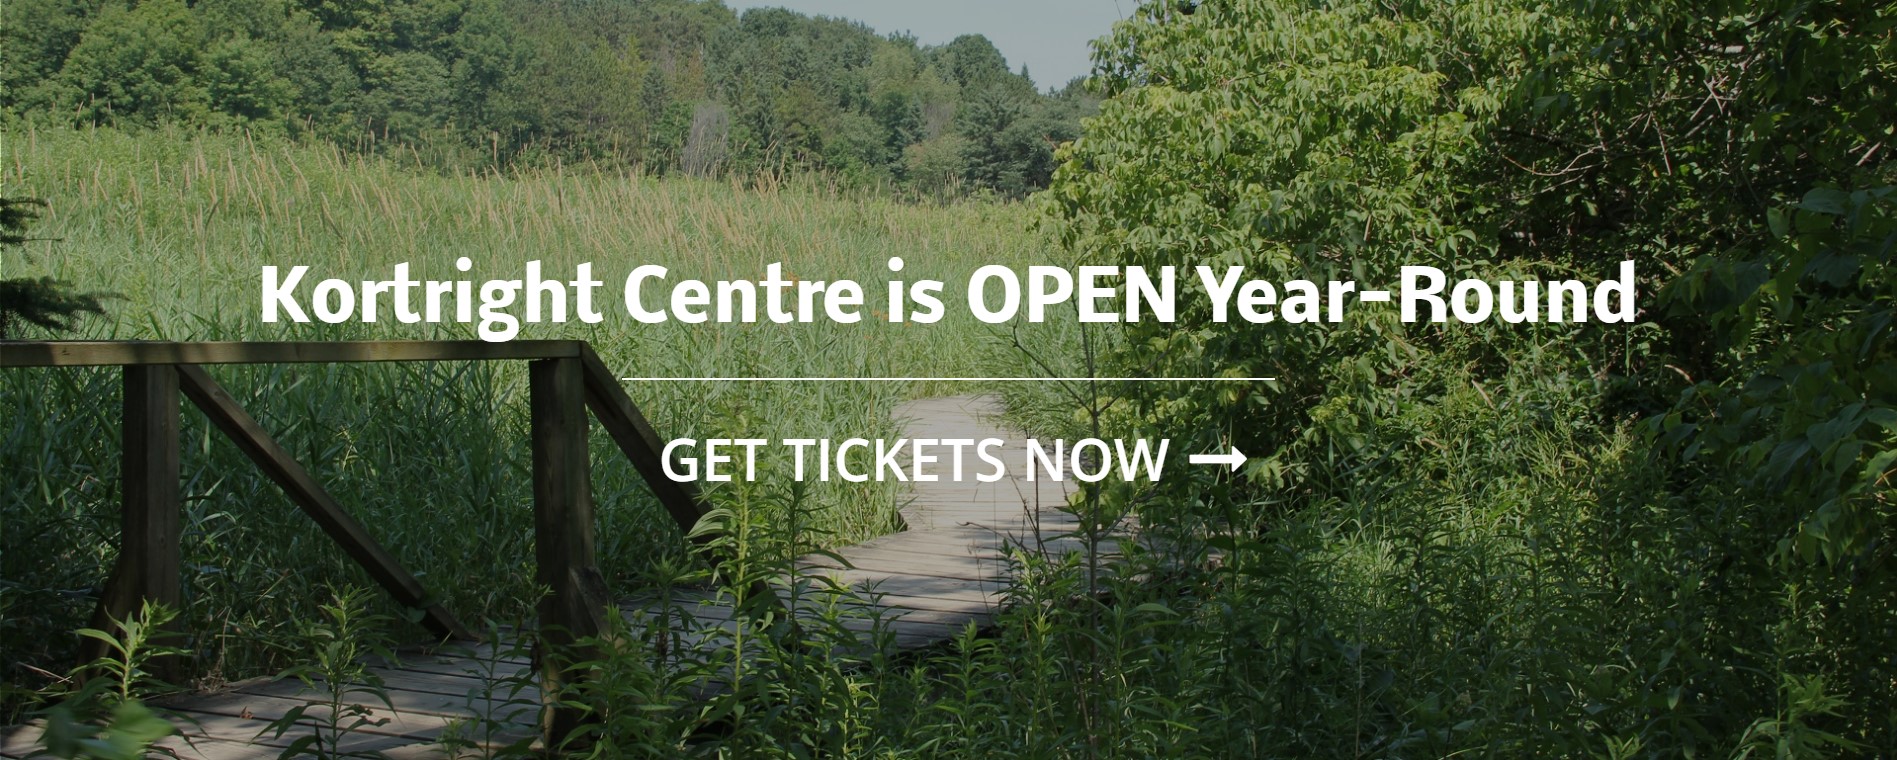 Kortright Centre for Conservation is open year-round